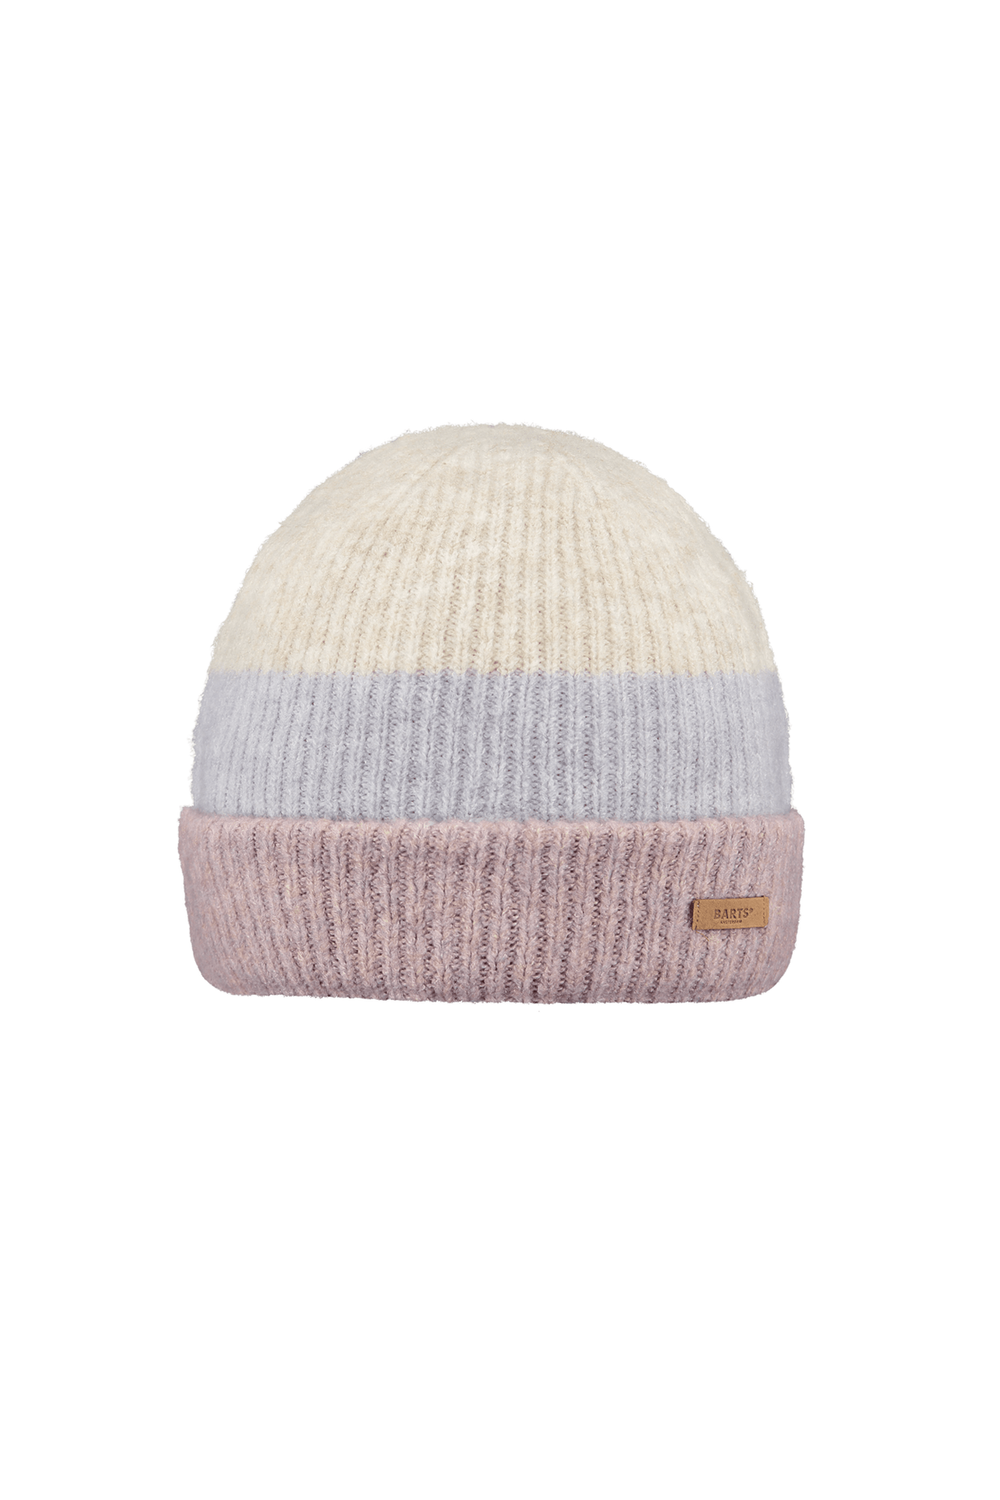 Barts Orchid Beanie Suzam